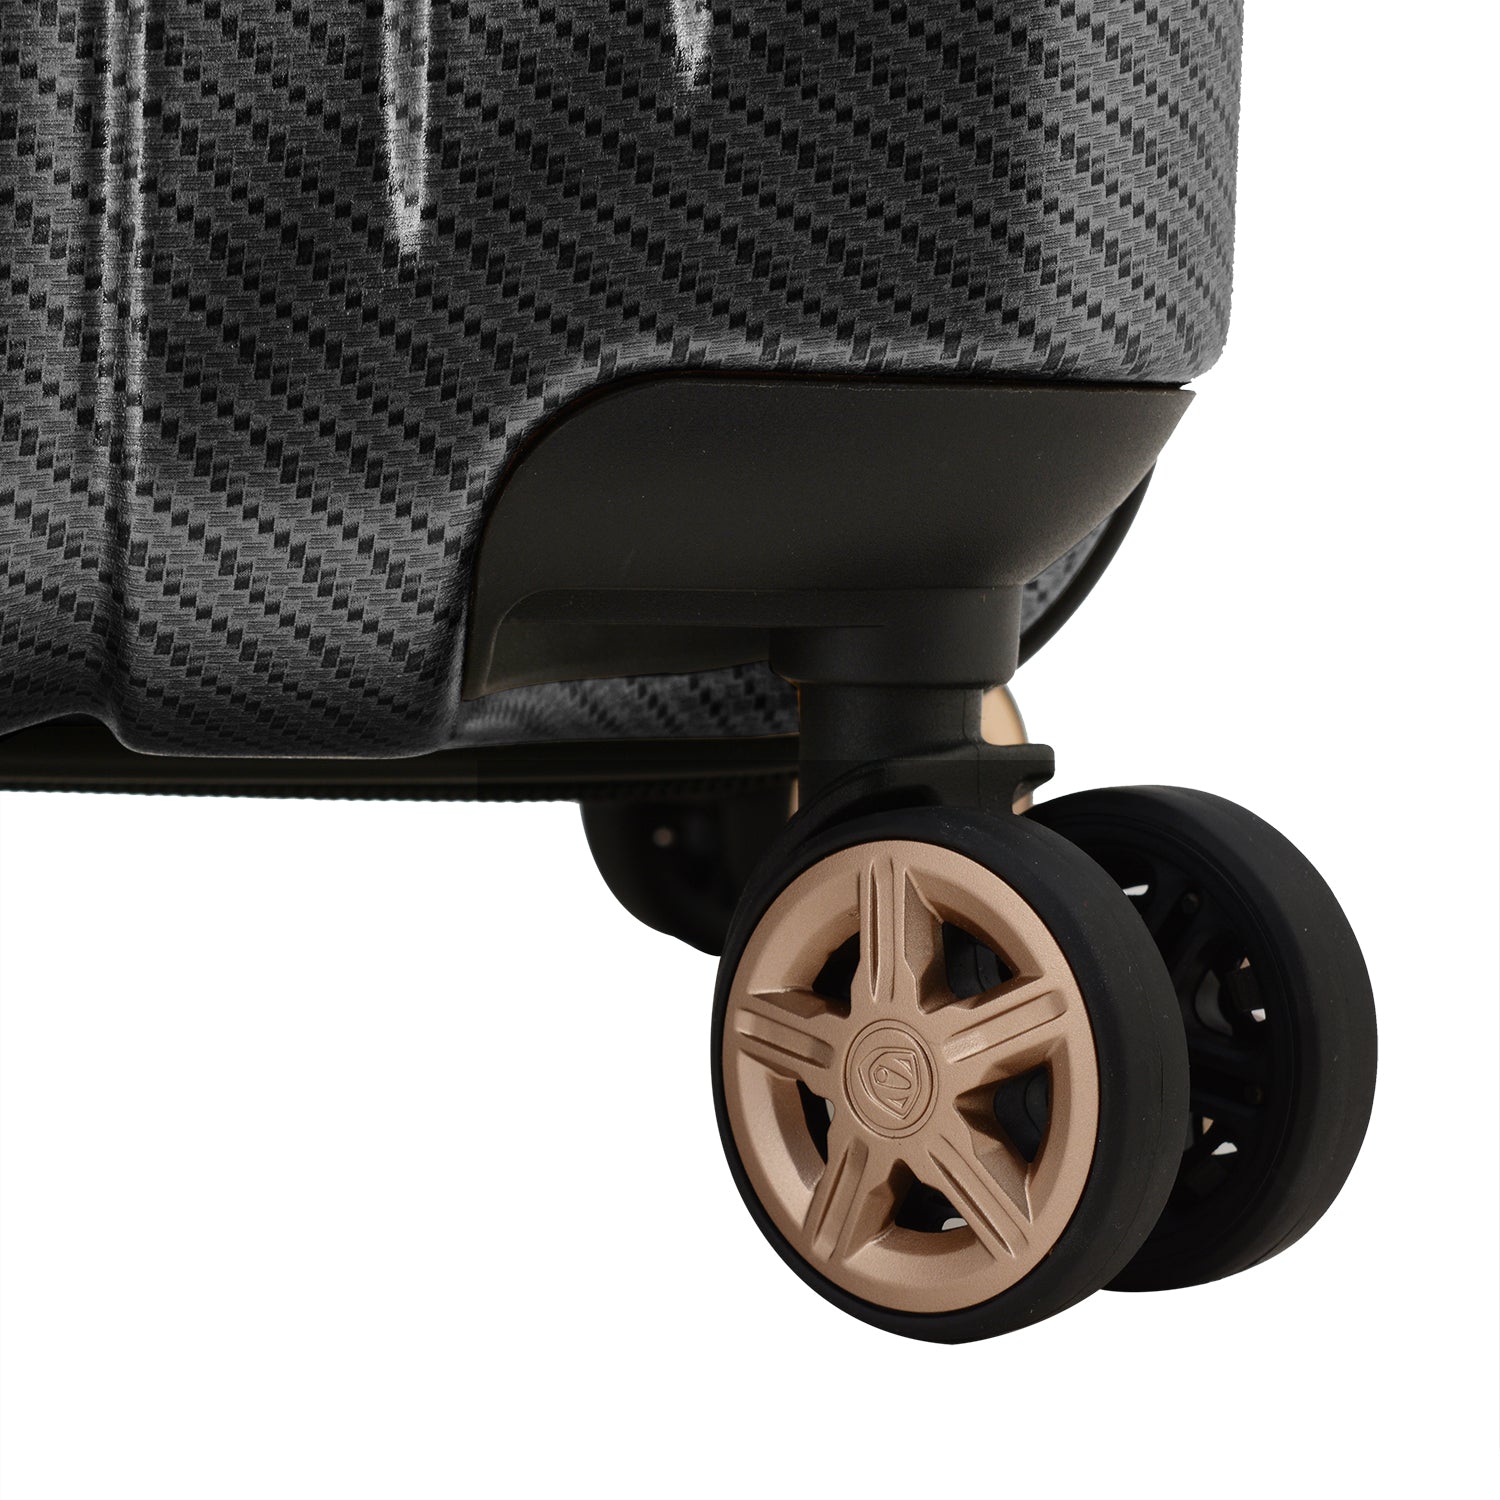 Wheels for Continent Adventure Luggage Collection